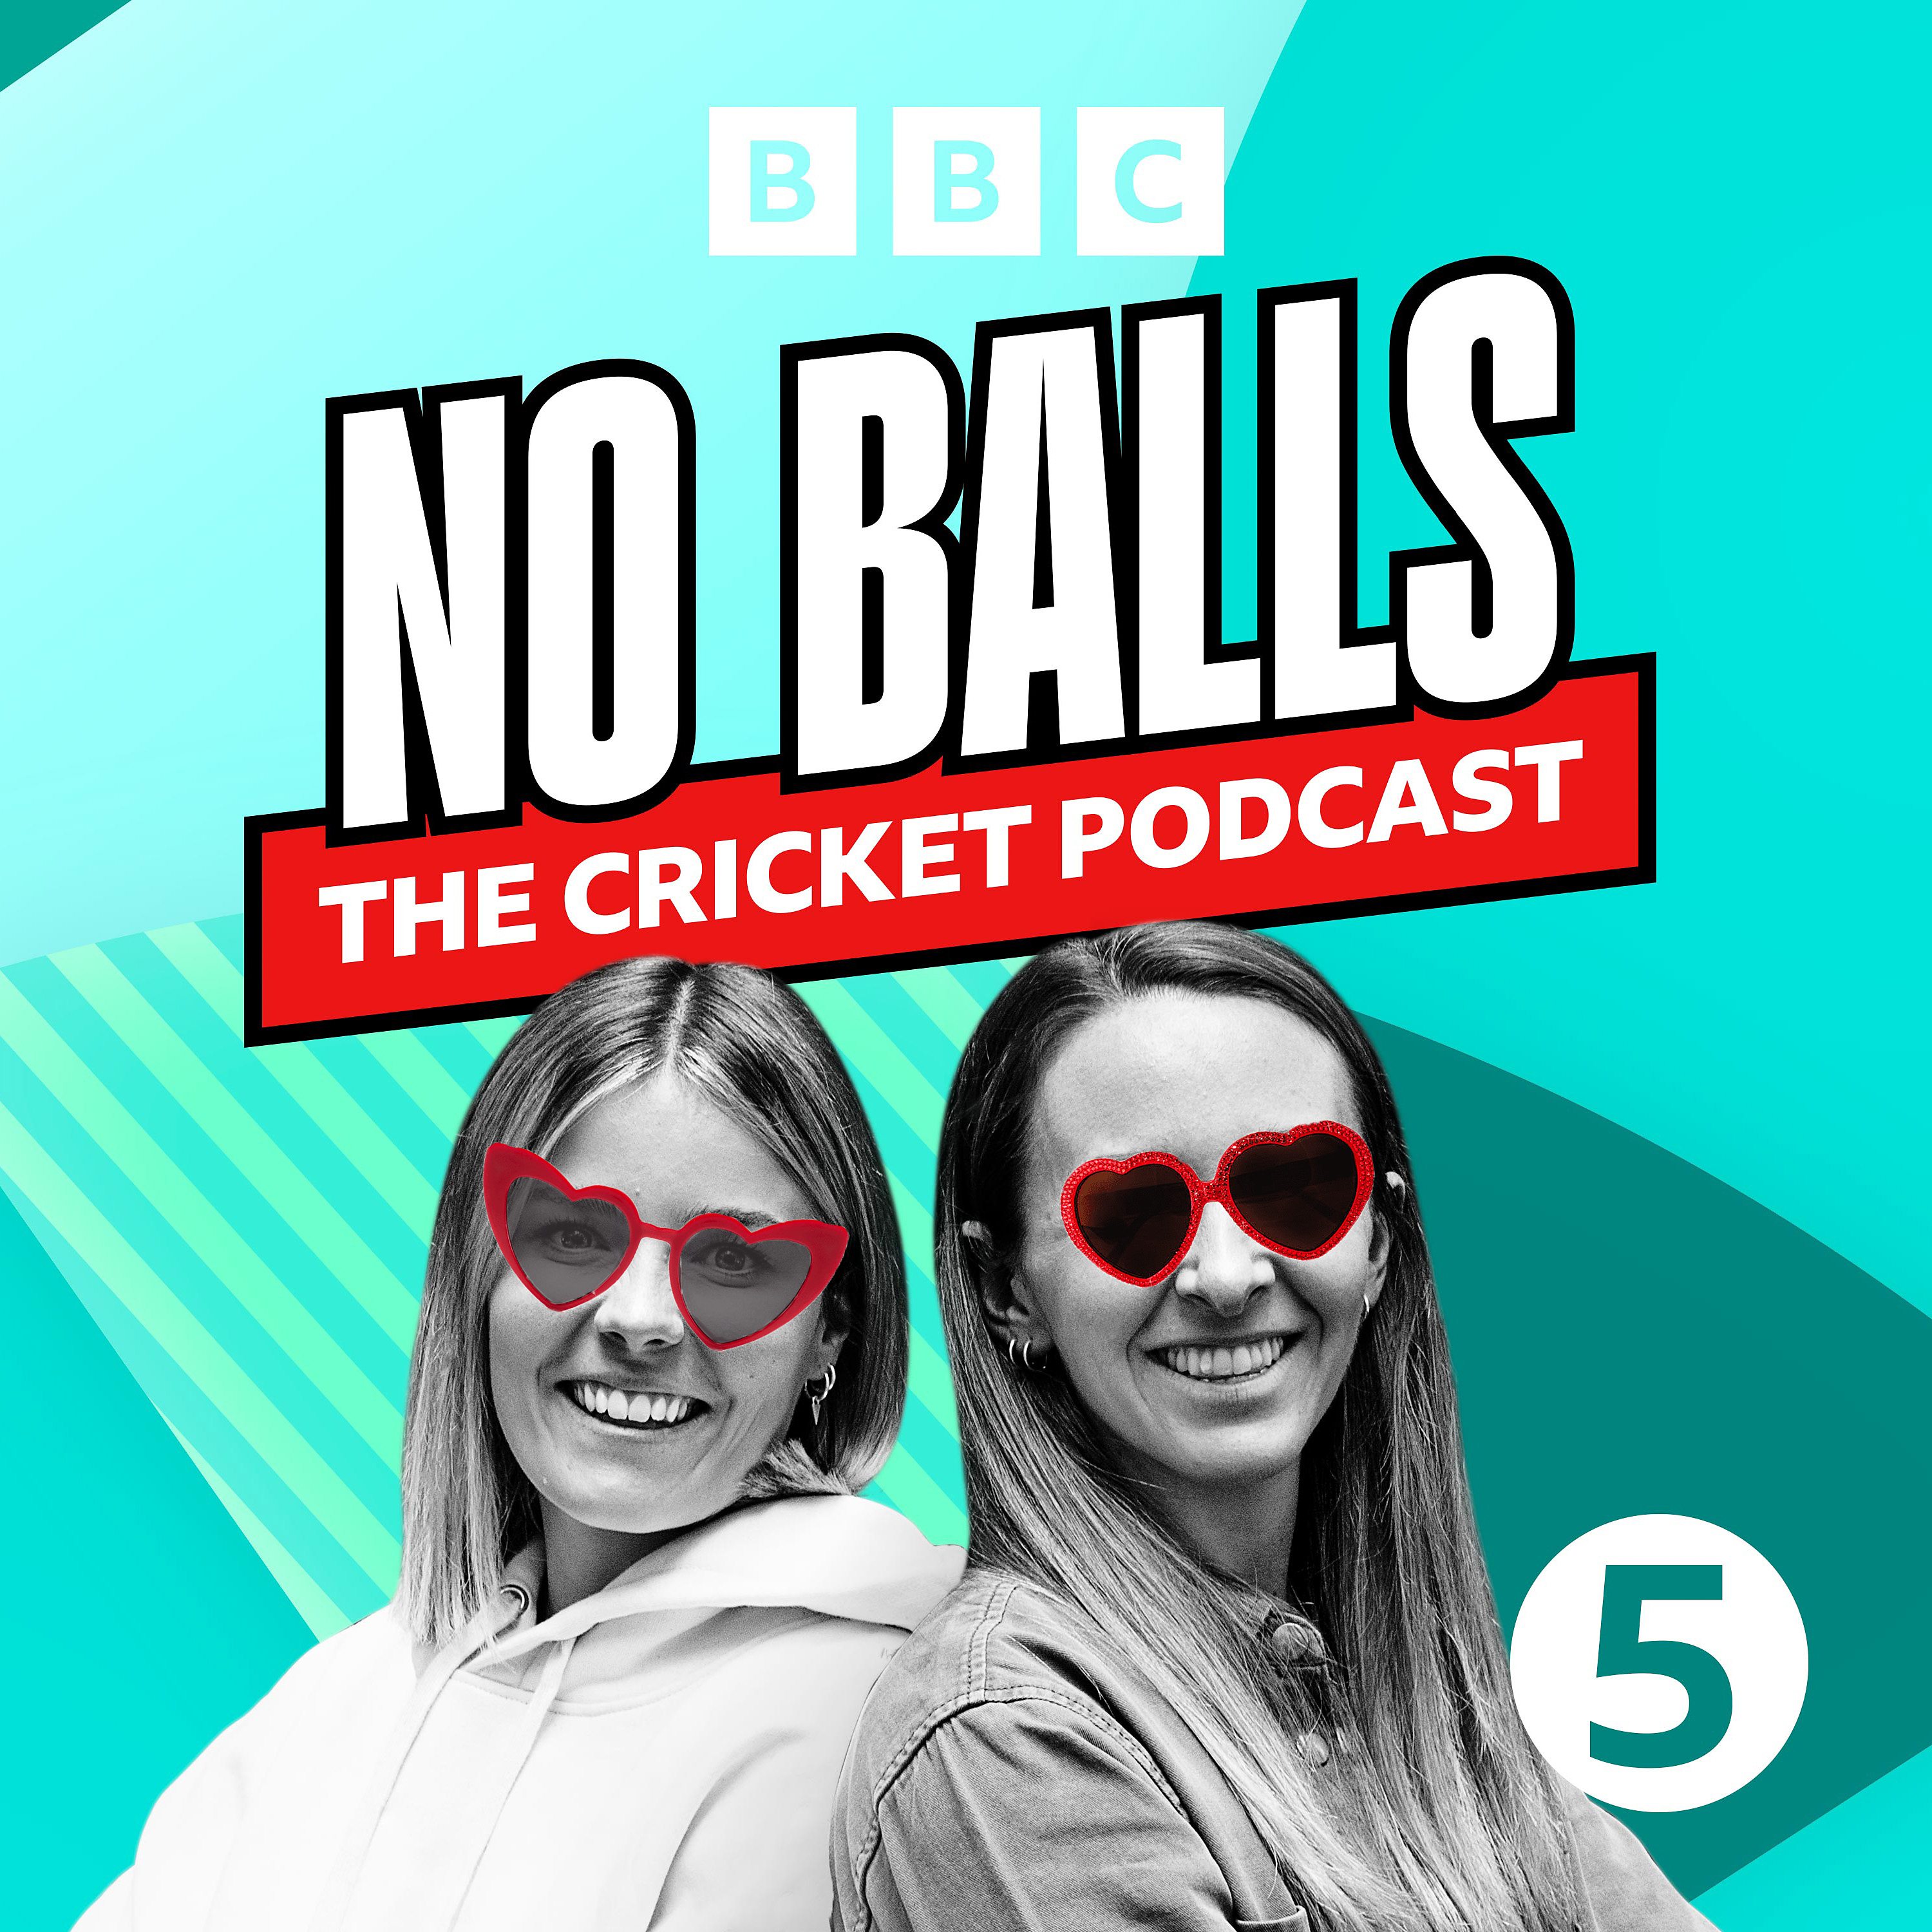 No Balls: The Cricket Podcast - It's a Valentine's Special with two very special guests!